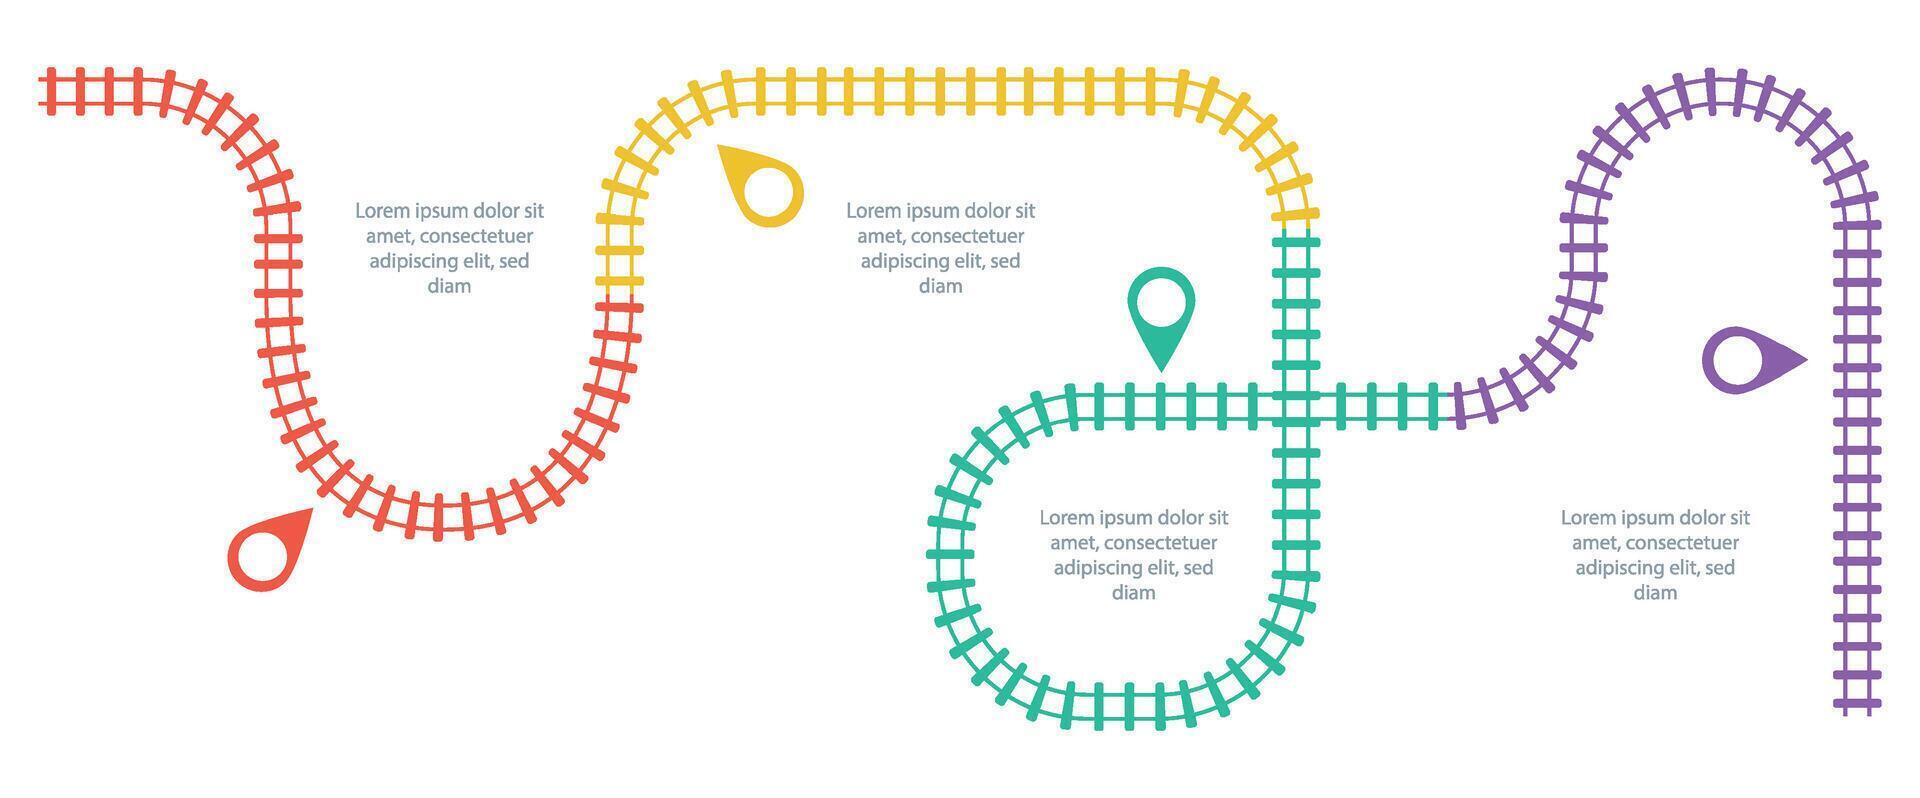 Railroad tracks, railway simple icon, rail track direction, train tracks colorful vector illustrations. Timeline Infographic elements, simple illustration on a white background.